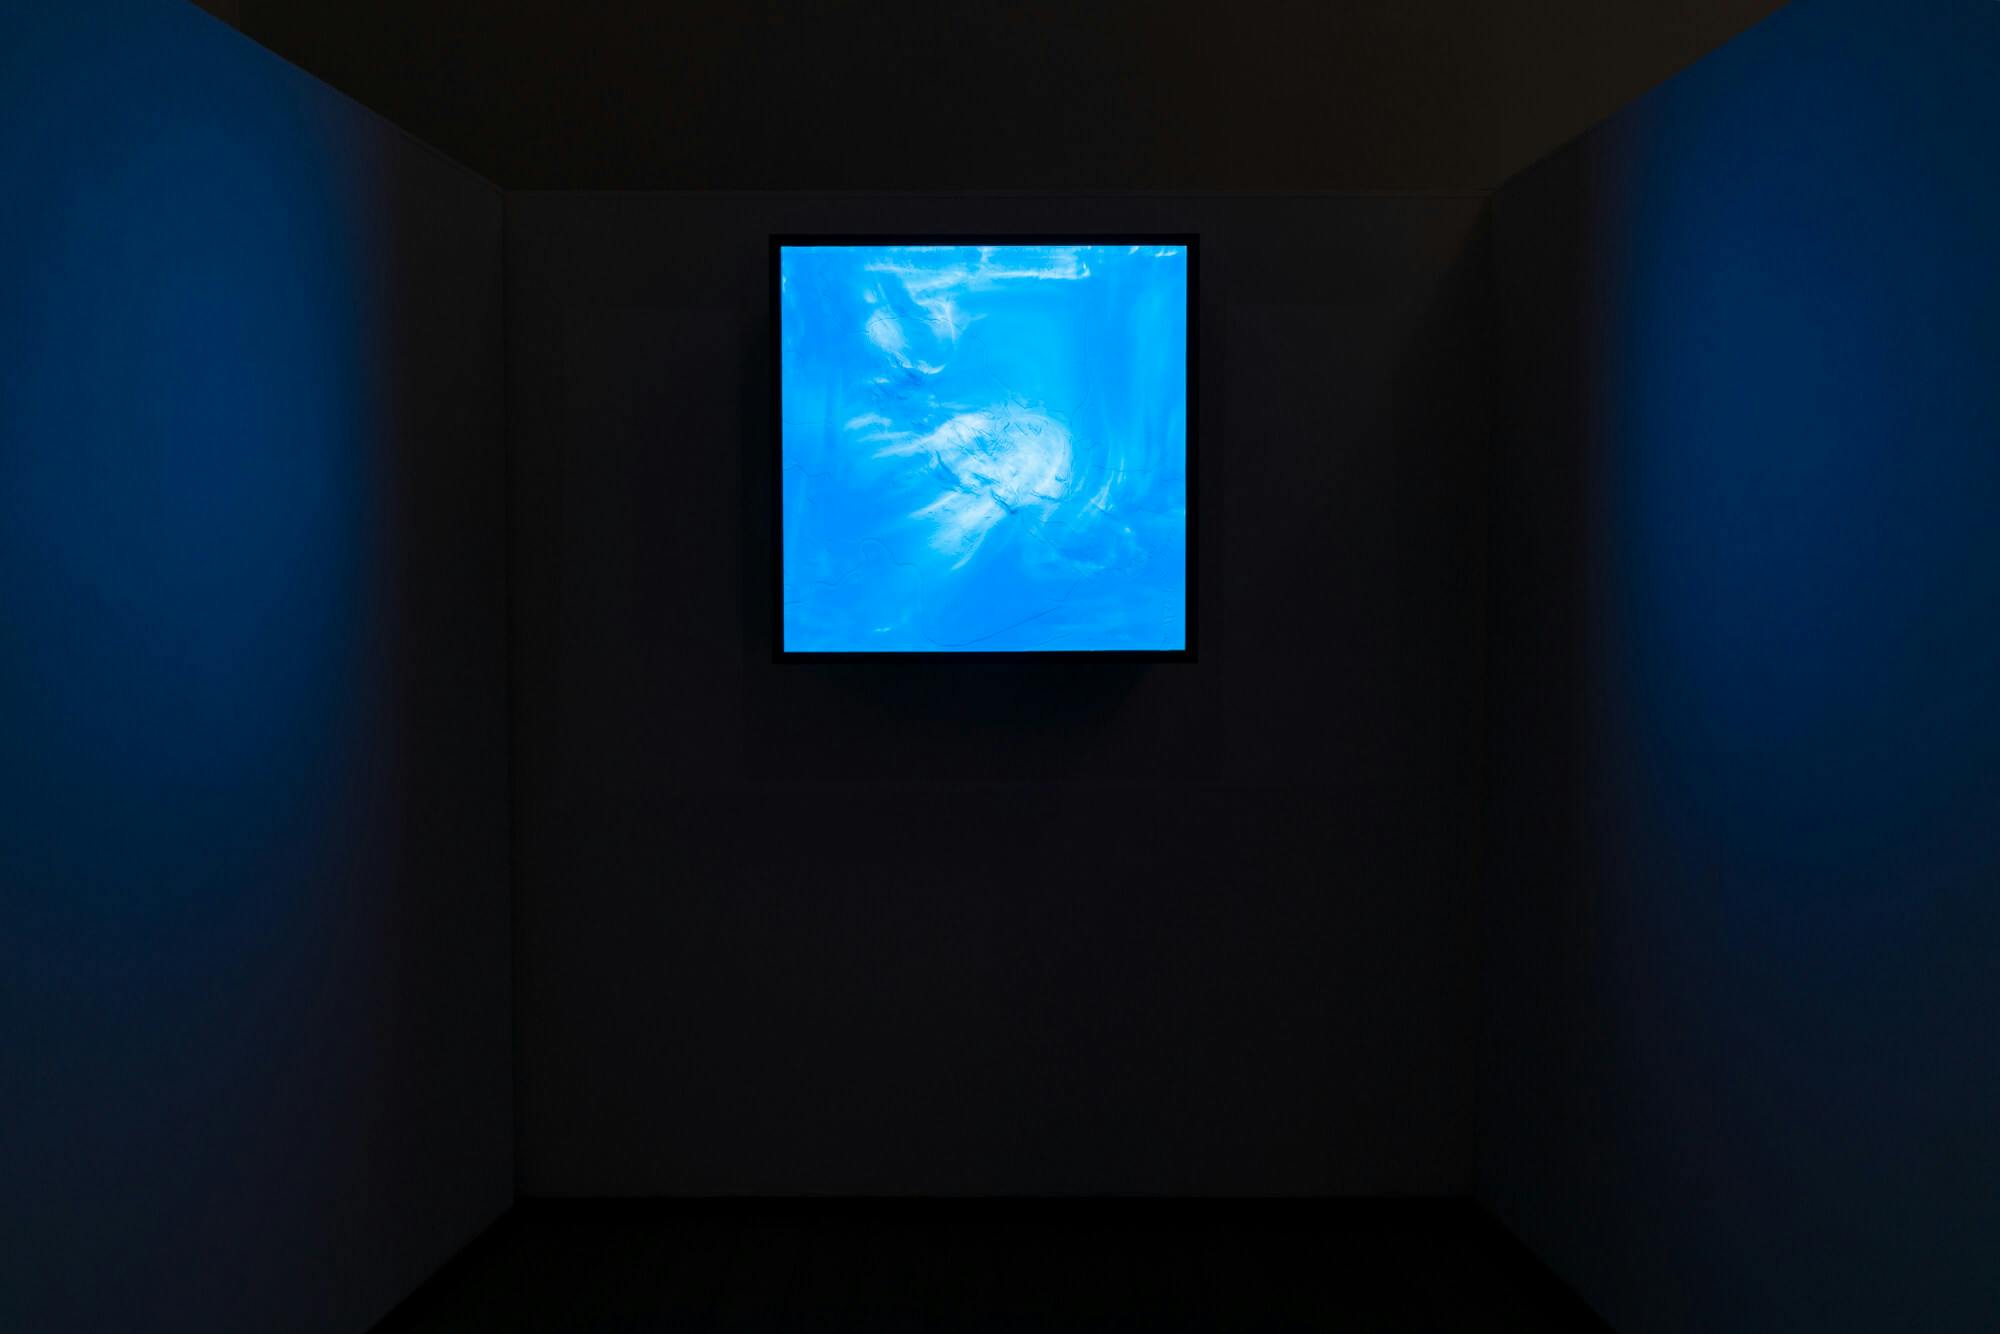 Installation image of "You Are Here." Small, bright blue square in a dark room on a pitch black wall. The blue light reflects on the side walls creating a navy hue.